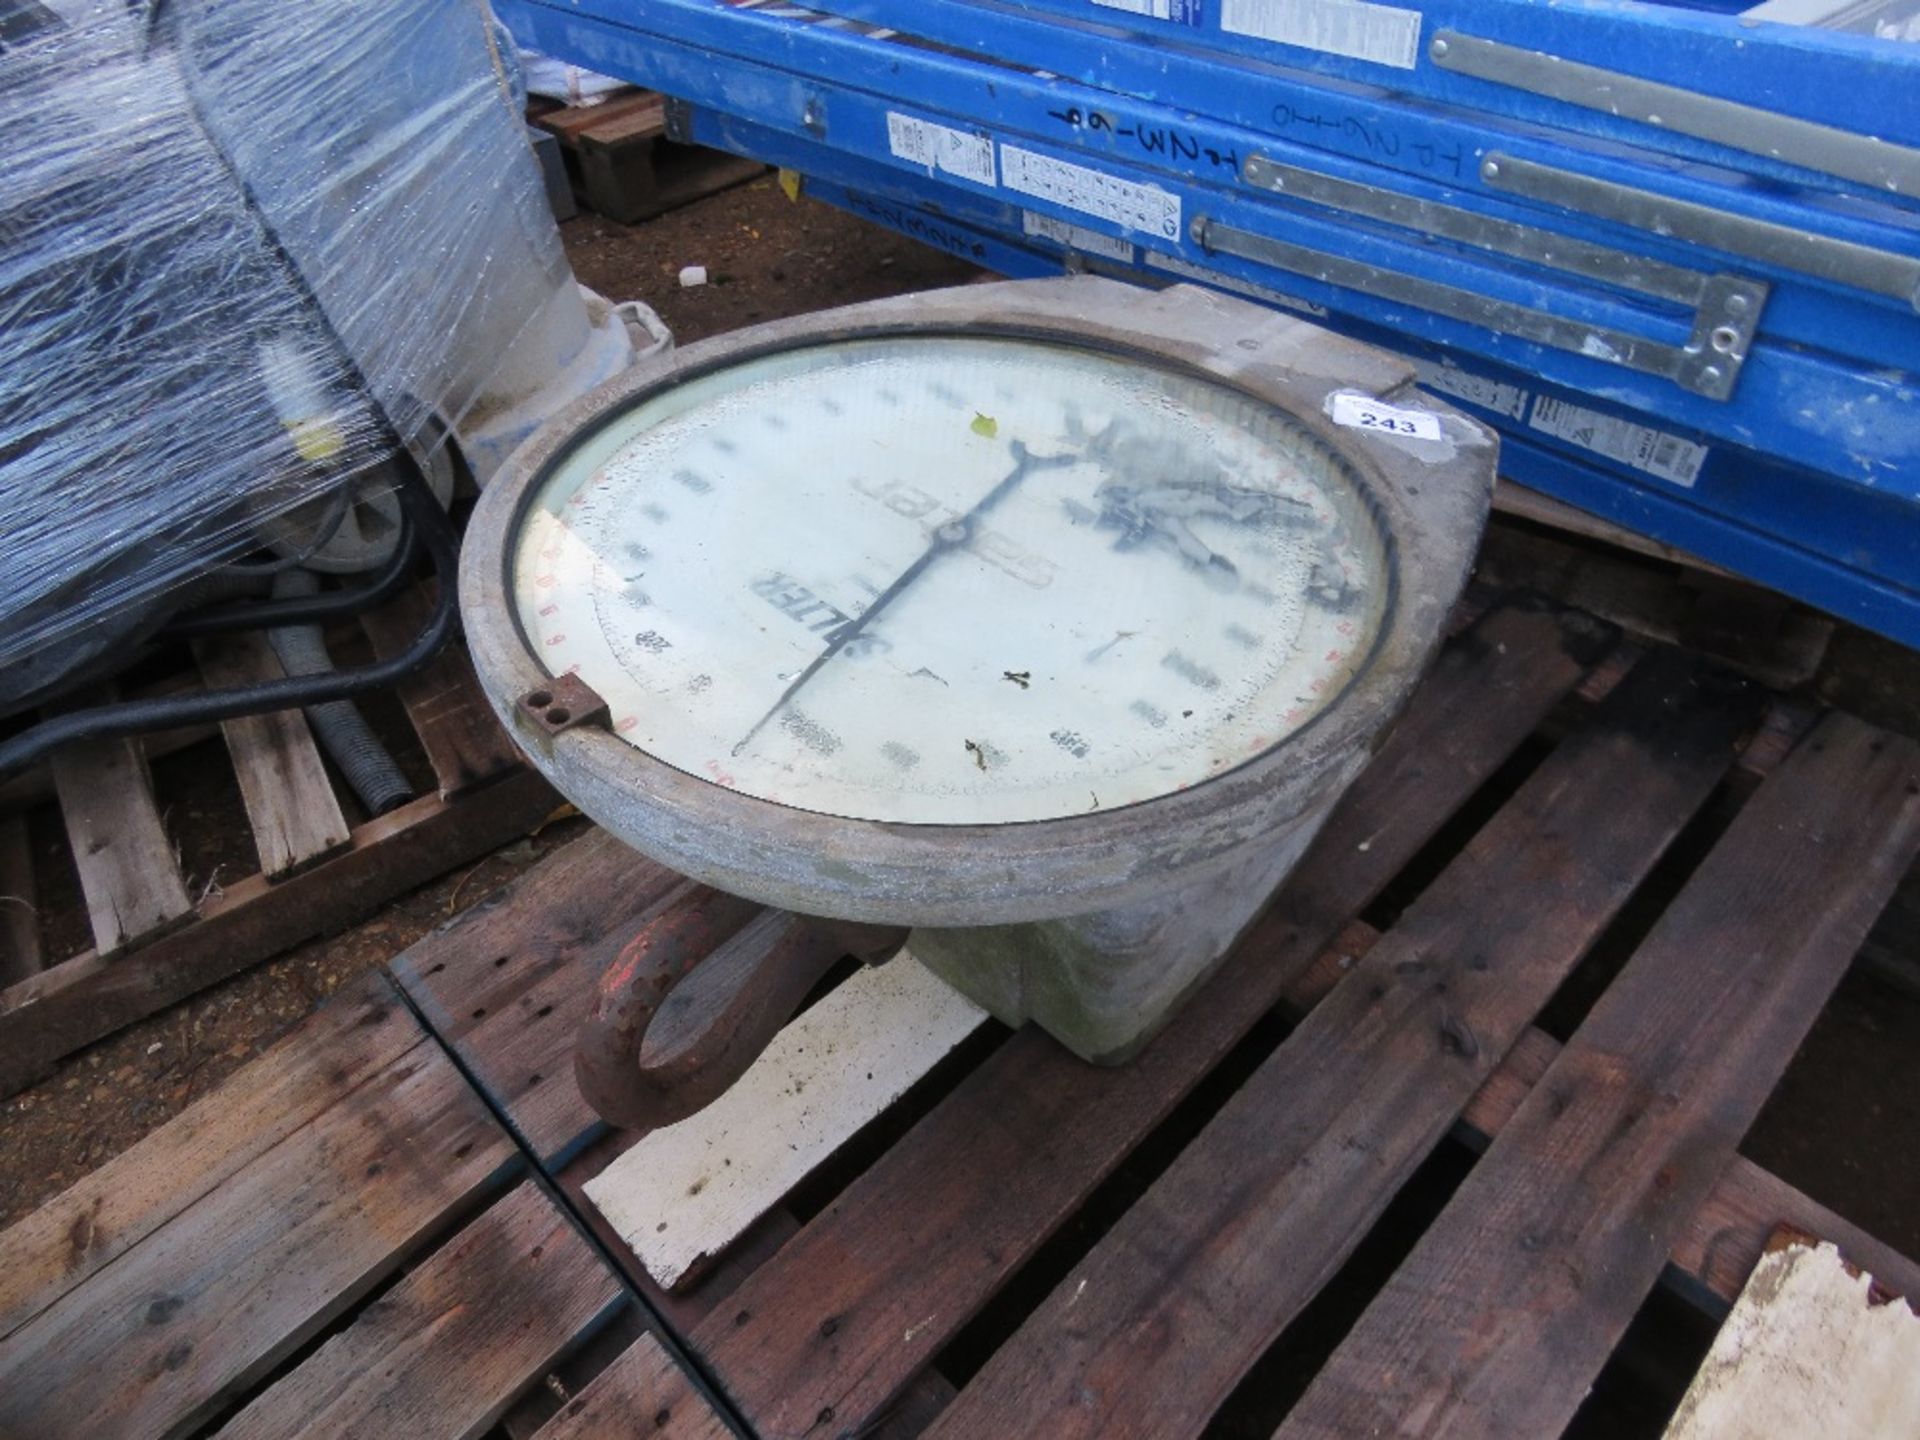 SET OF LARGE SALTER CRANE SCALES, 5 TONNE RATED. THIS LOT IS SOLD UNDER THE AUCTIONEERS MARGIN SC - Image 2 of 3